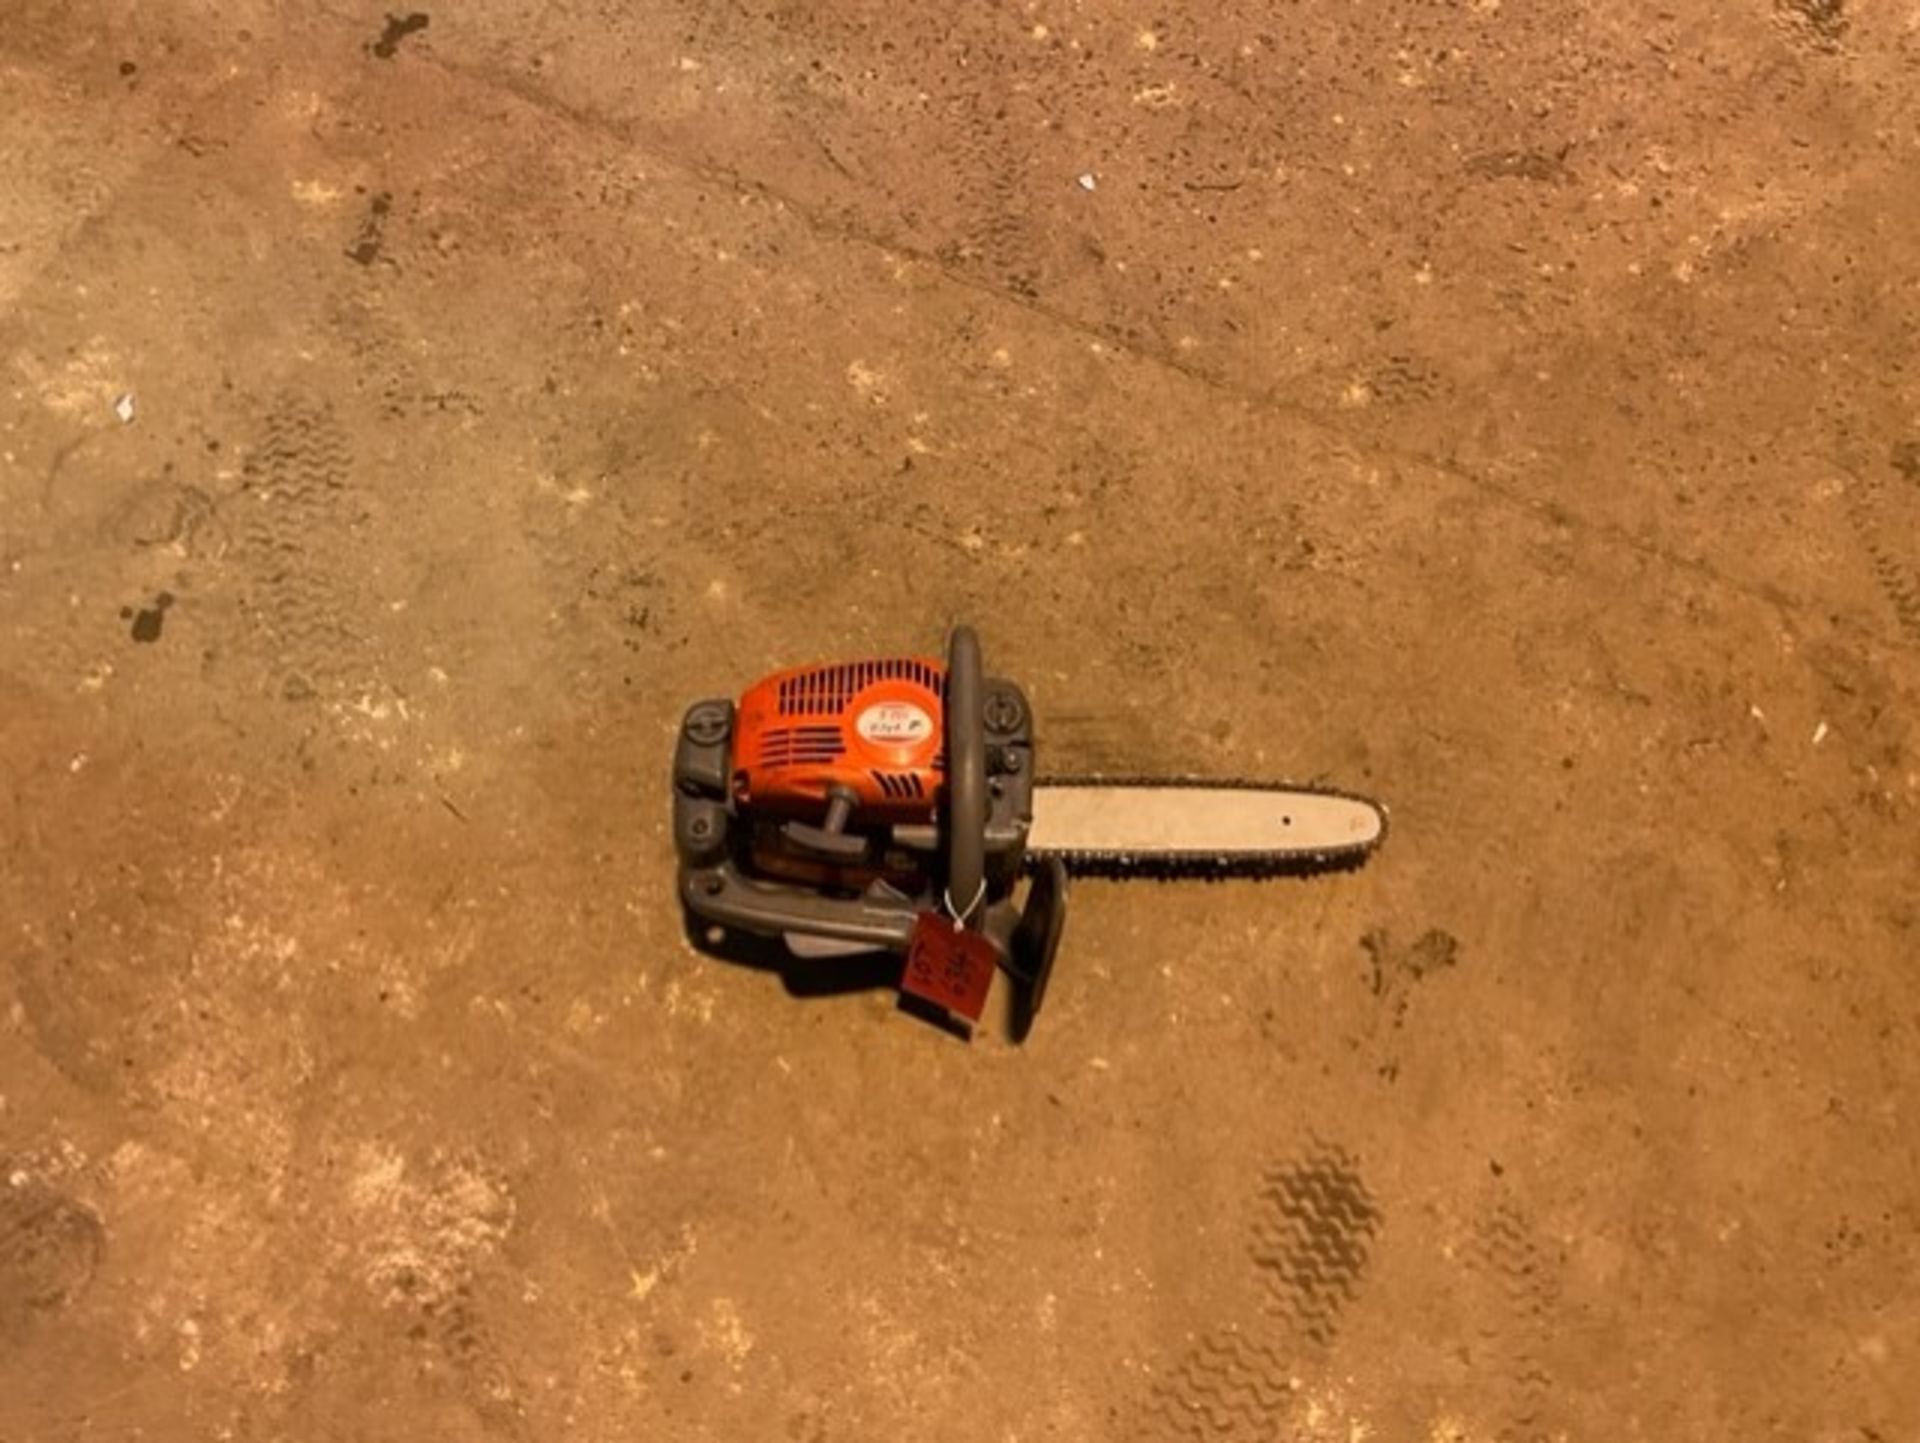 Efco pruning saw tidy little machine - Image 2 of 3